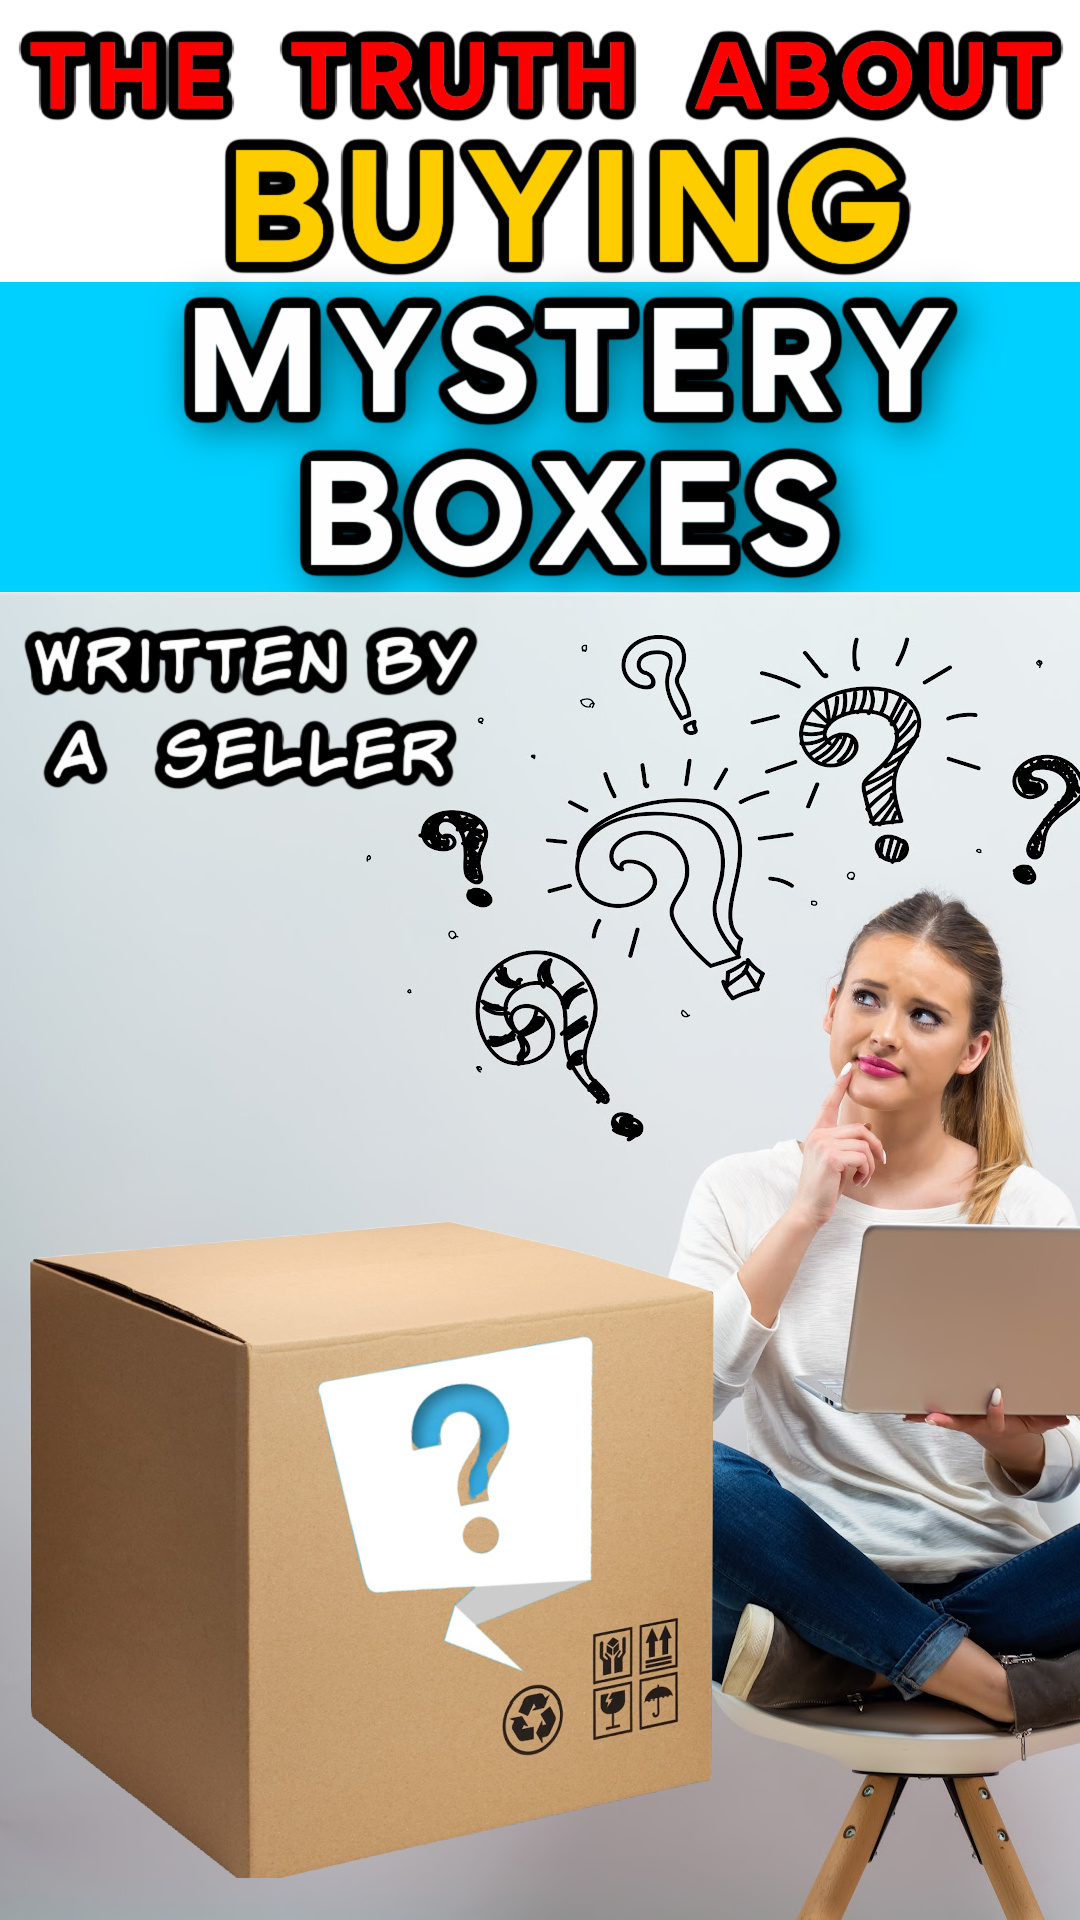 https://cdn11.bigcommerce.com/s-xad432y4/product_images/uploaded_images/the-truth-about-buying-mystery-boxes-written-by-a-seller-efvugei.jpg